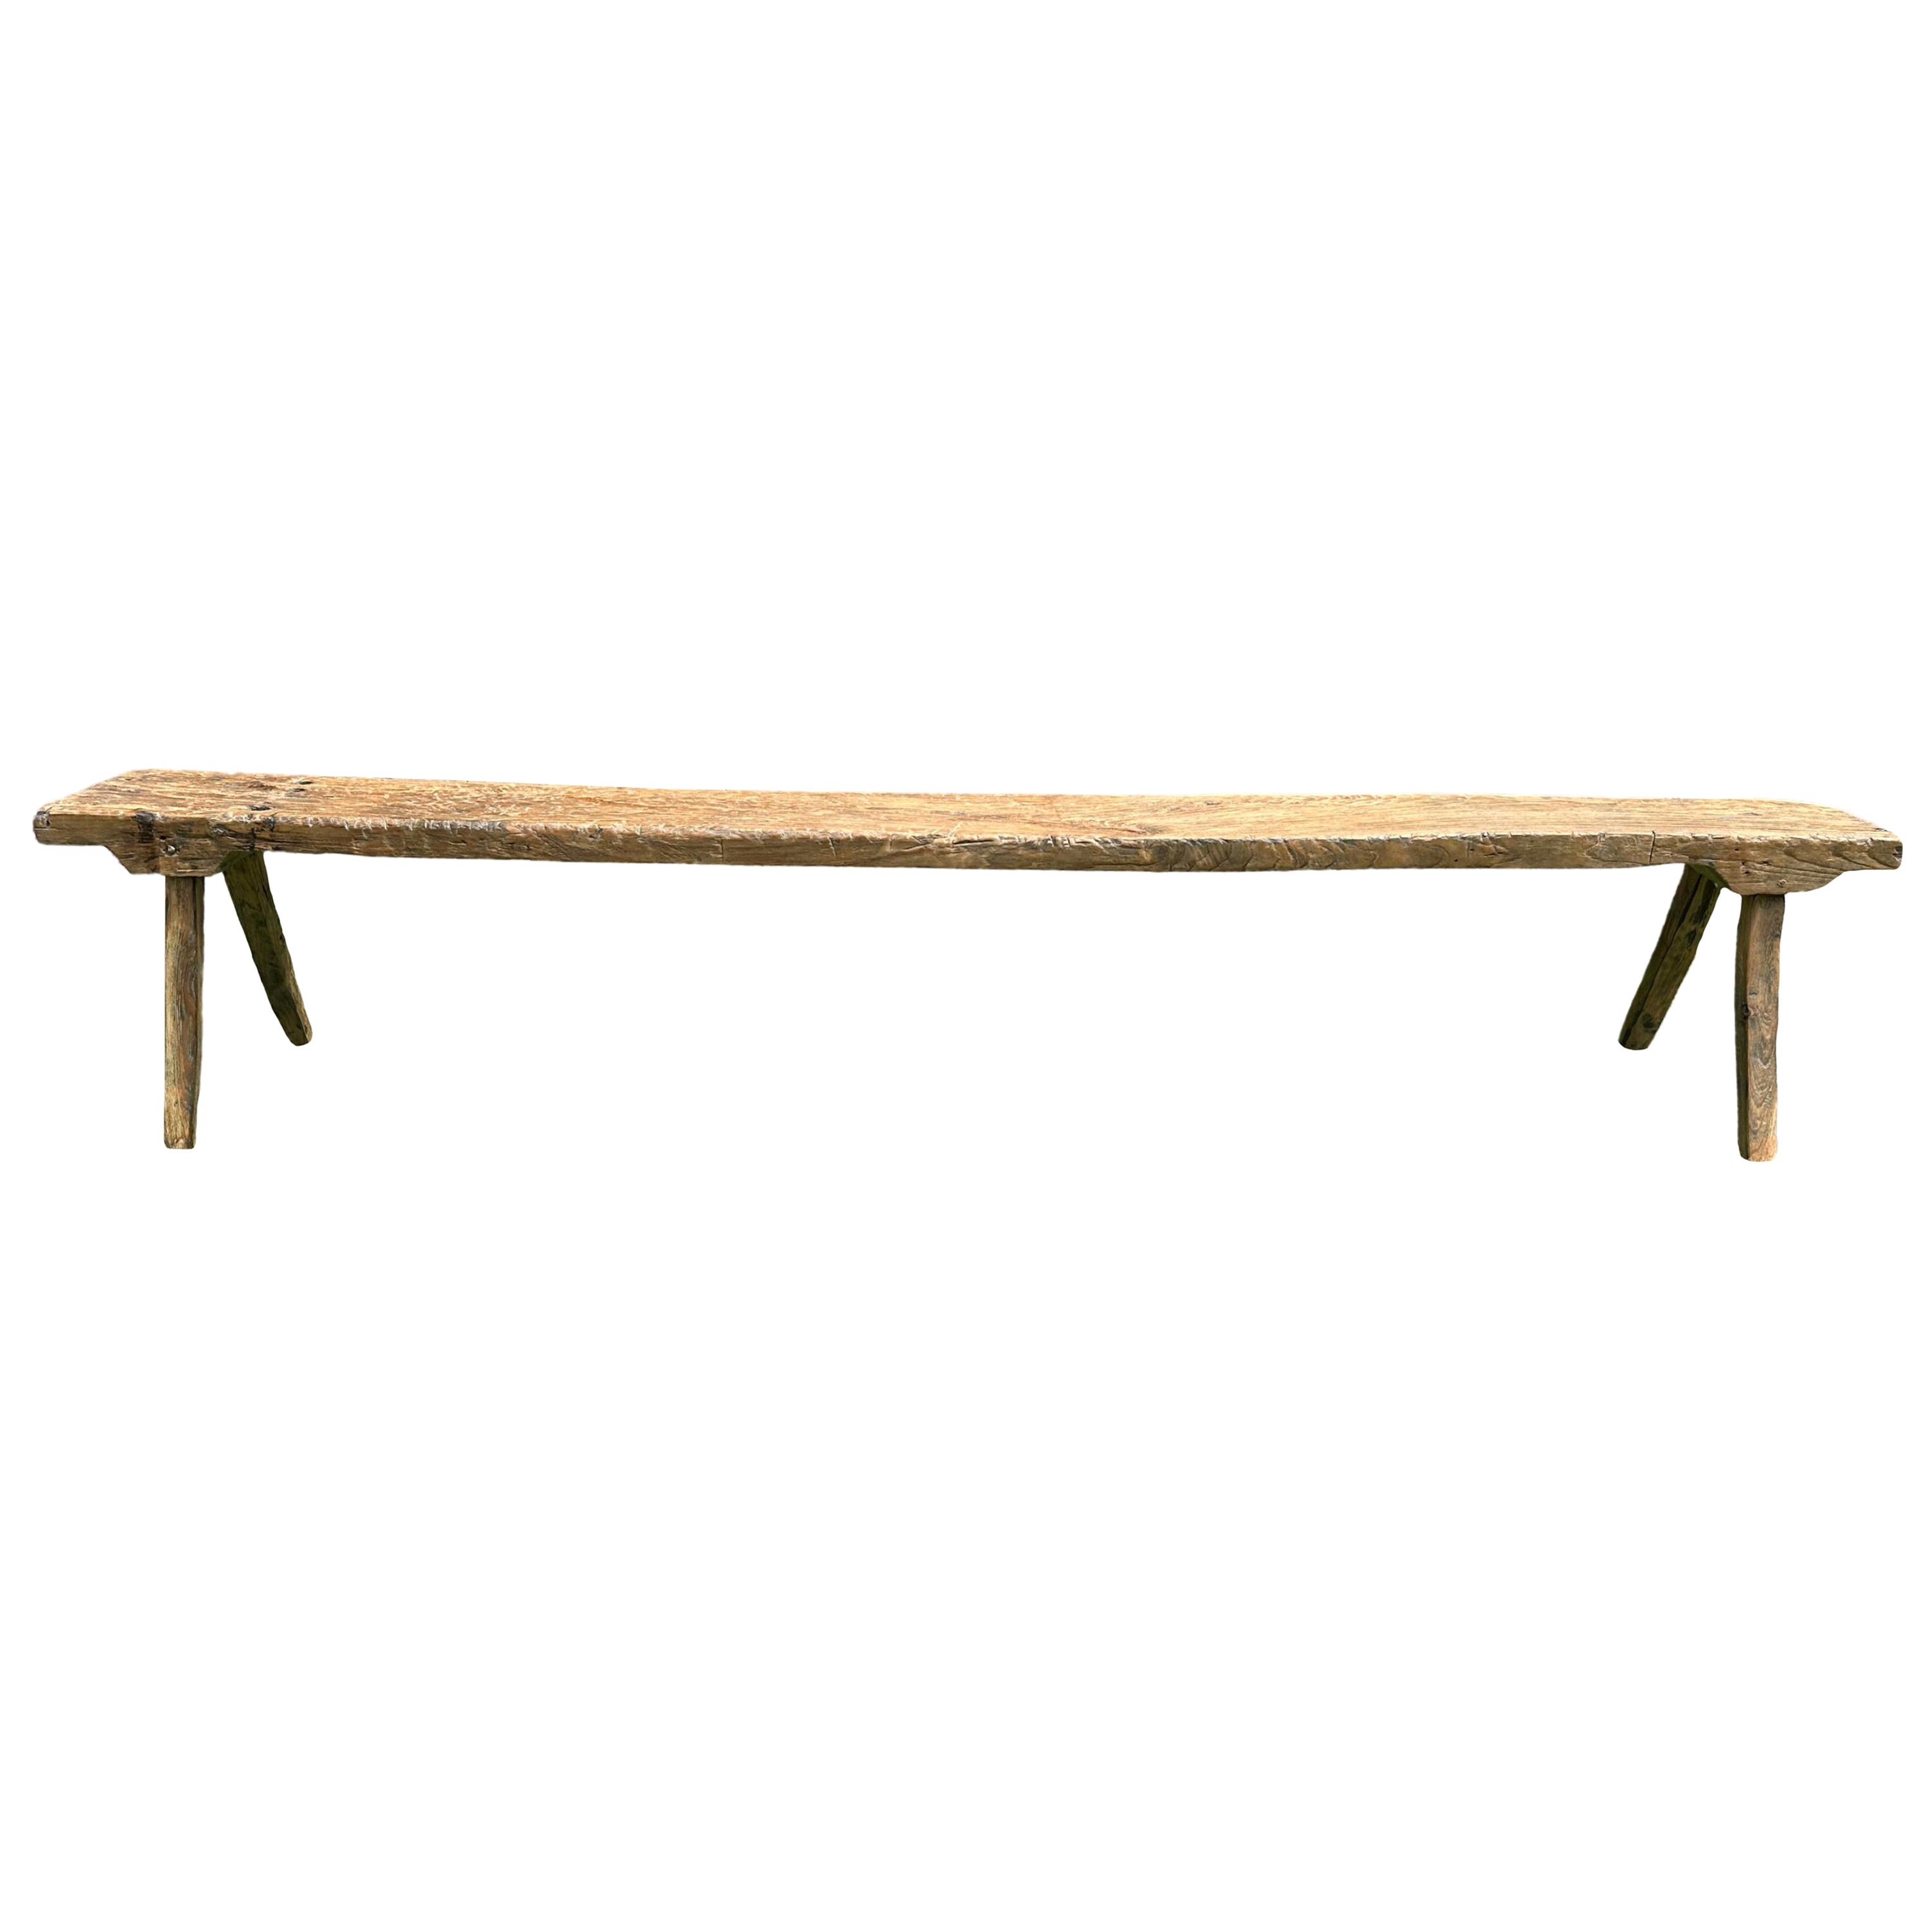 Sculptural Teak Bench Hand-Carved from Madura Island, Java, Indonesia, C. 1950 For Sale